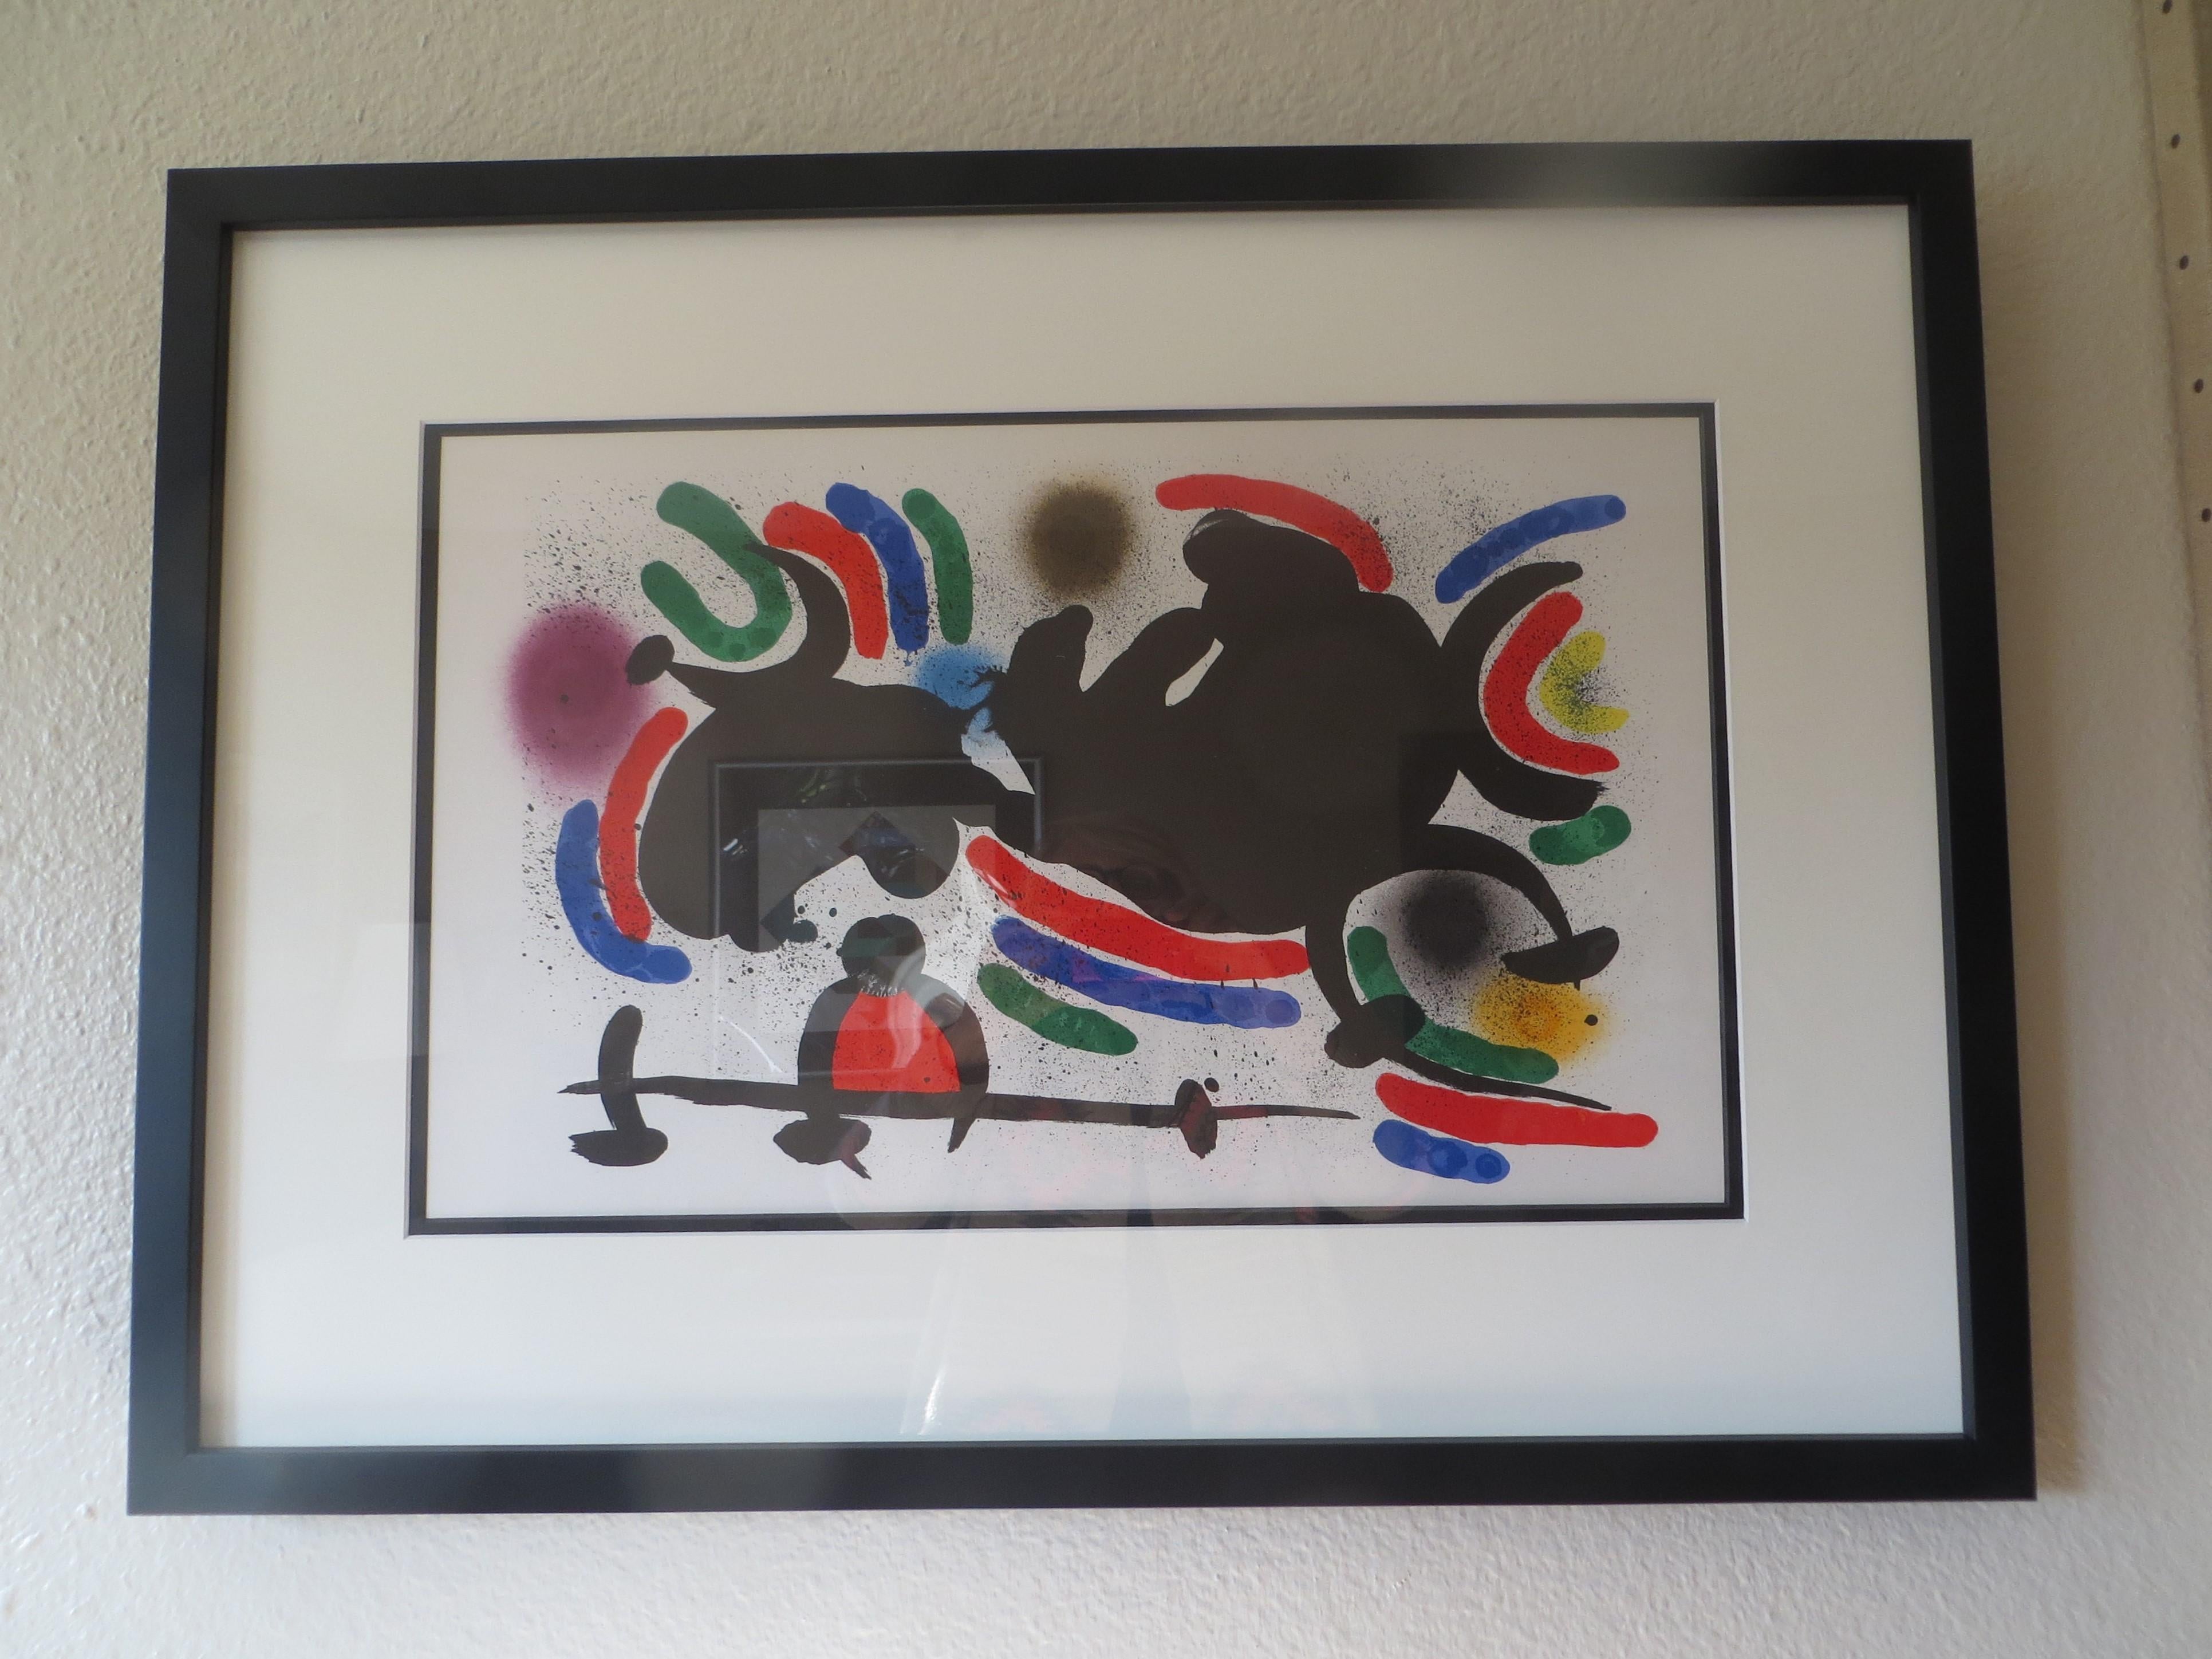 Abstract Lithograph I, Maegh Editor, Derriere le Miroir, 1978 For Sale 1